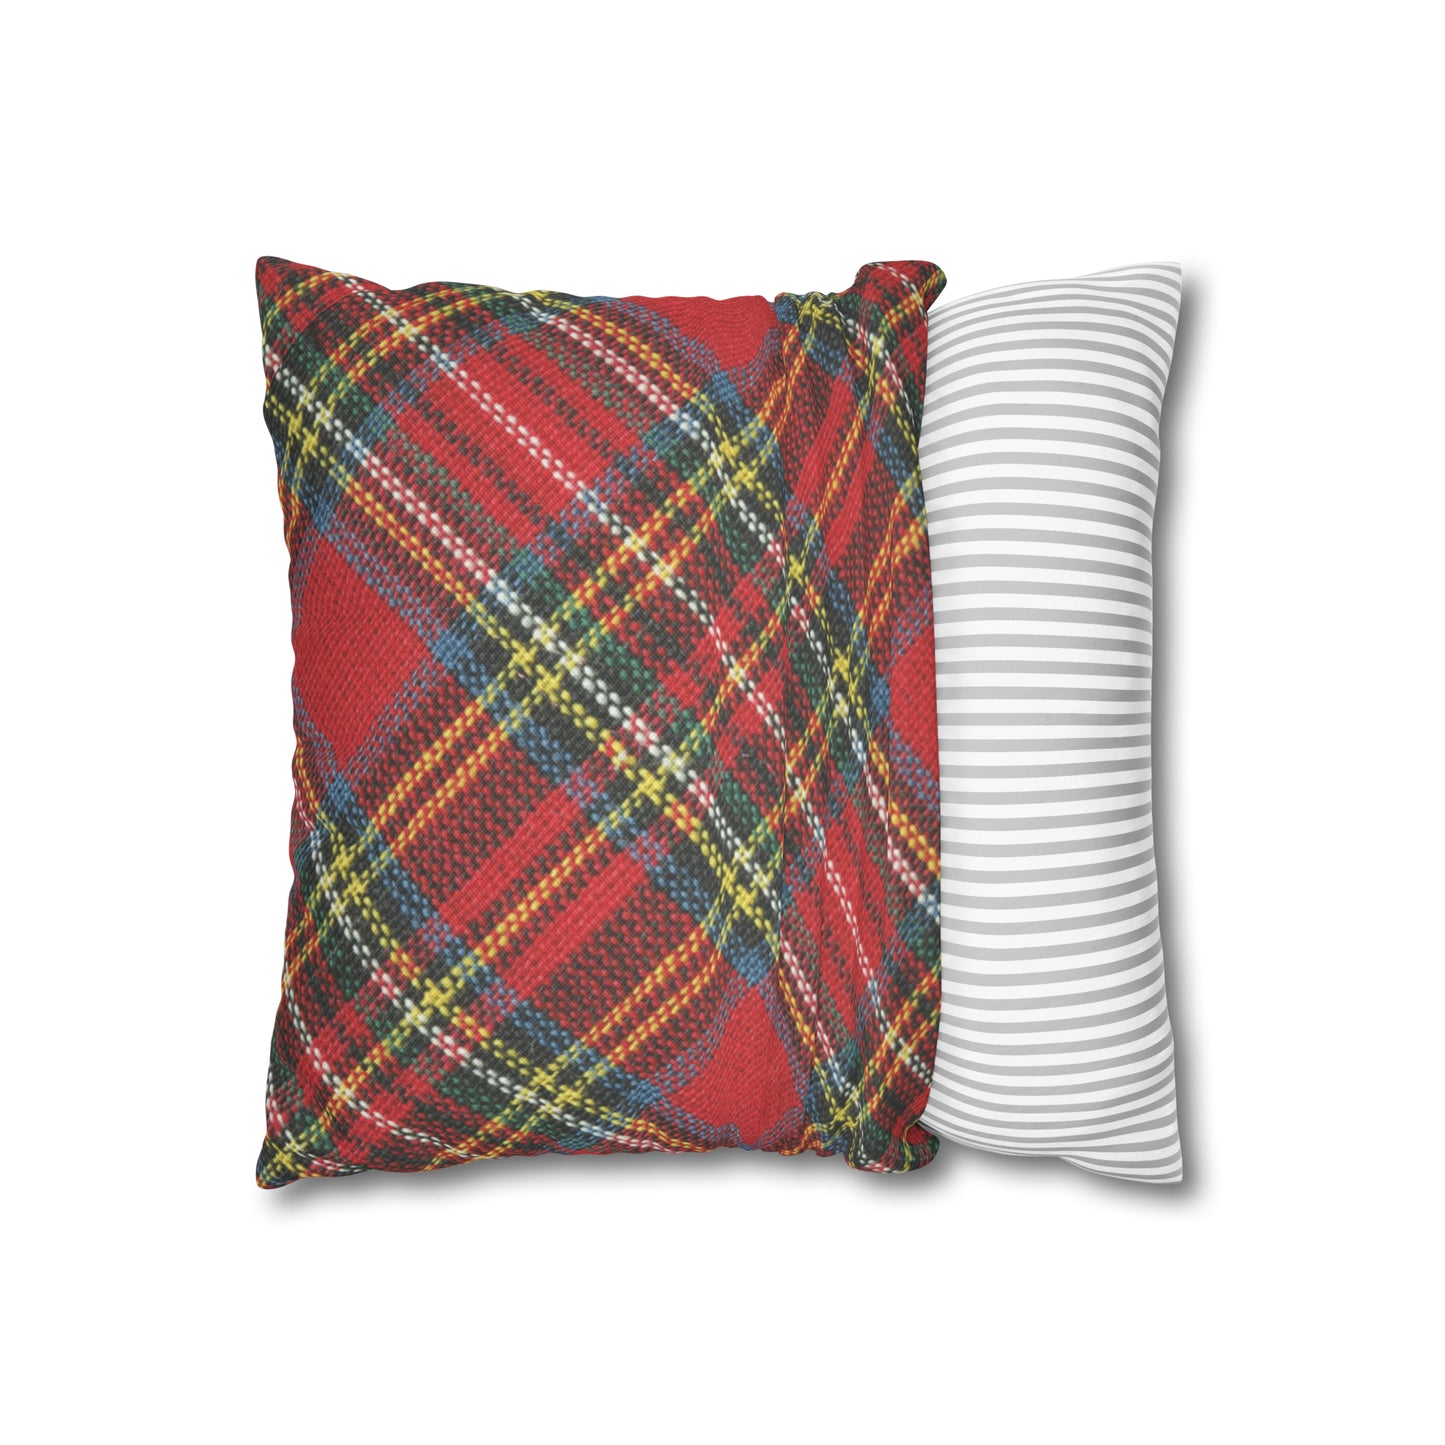 A red-plaid pillow case, made in America by Printify.